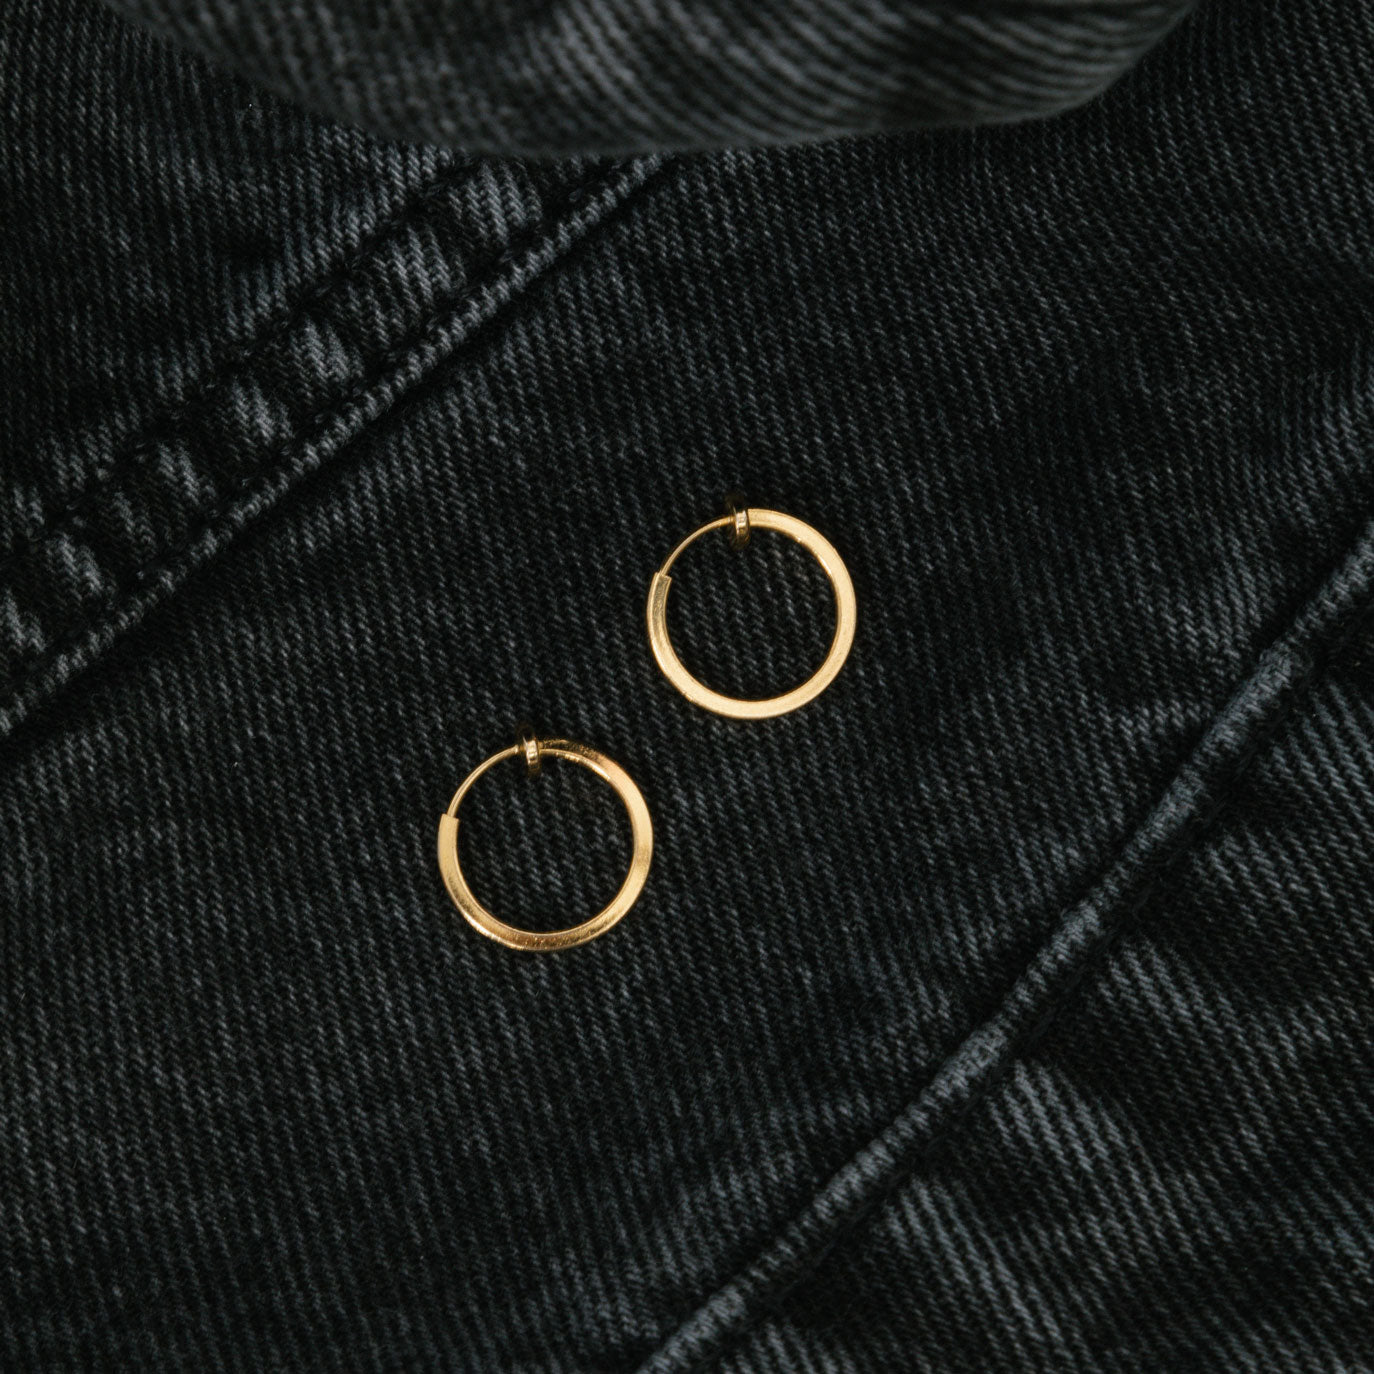 Image of the Classic Hoop Clip On Earrings feature a sliding spring closure that is ideal for small or thin ear lobes. The secure hold enables comfortable wear up to 4 hours, and the design automatically adjusts to the thickness of the ear. Crafted from stainless steel, the earrings come as a single pair.